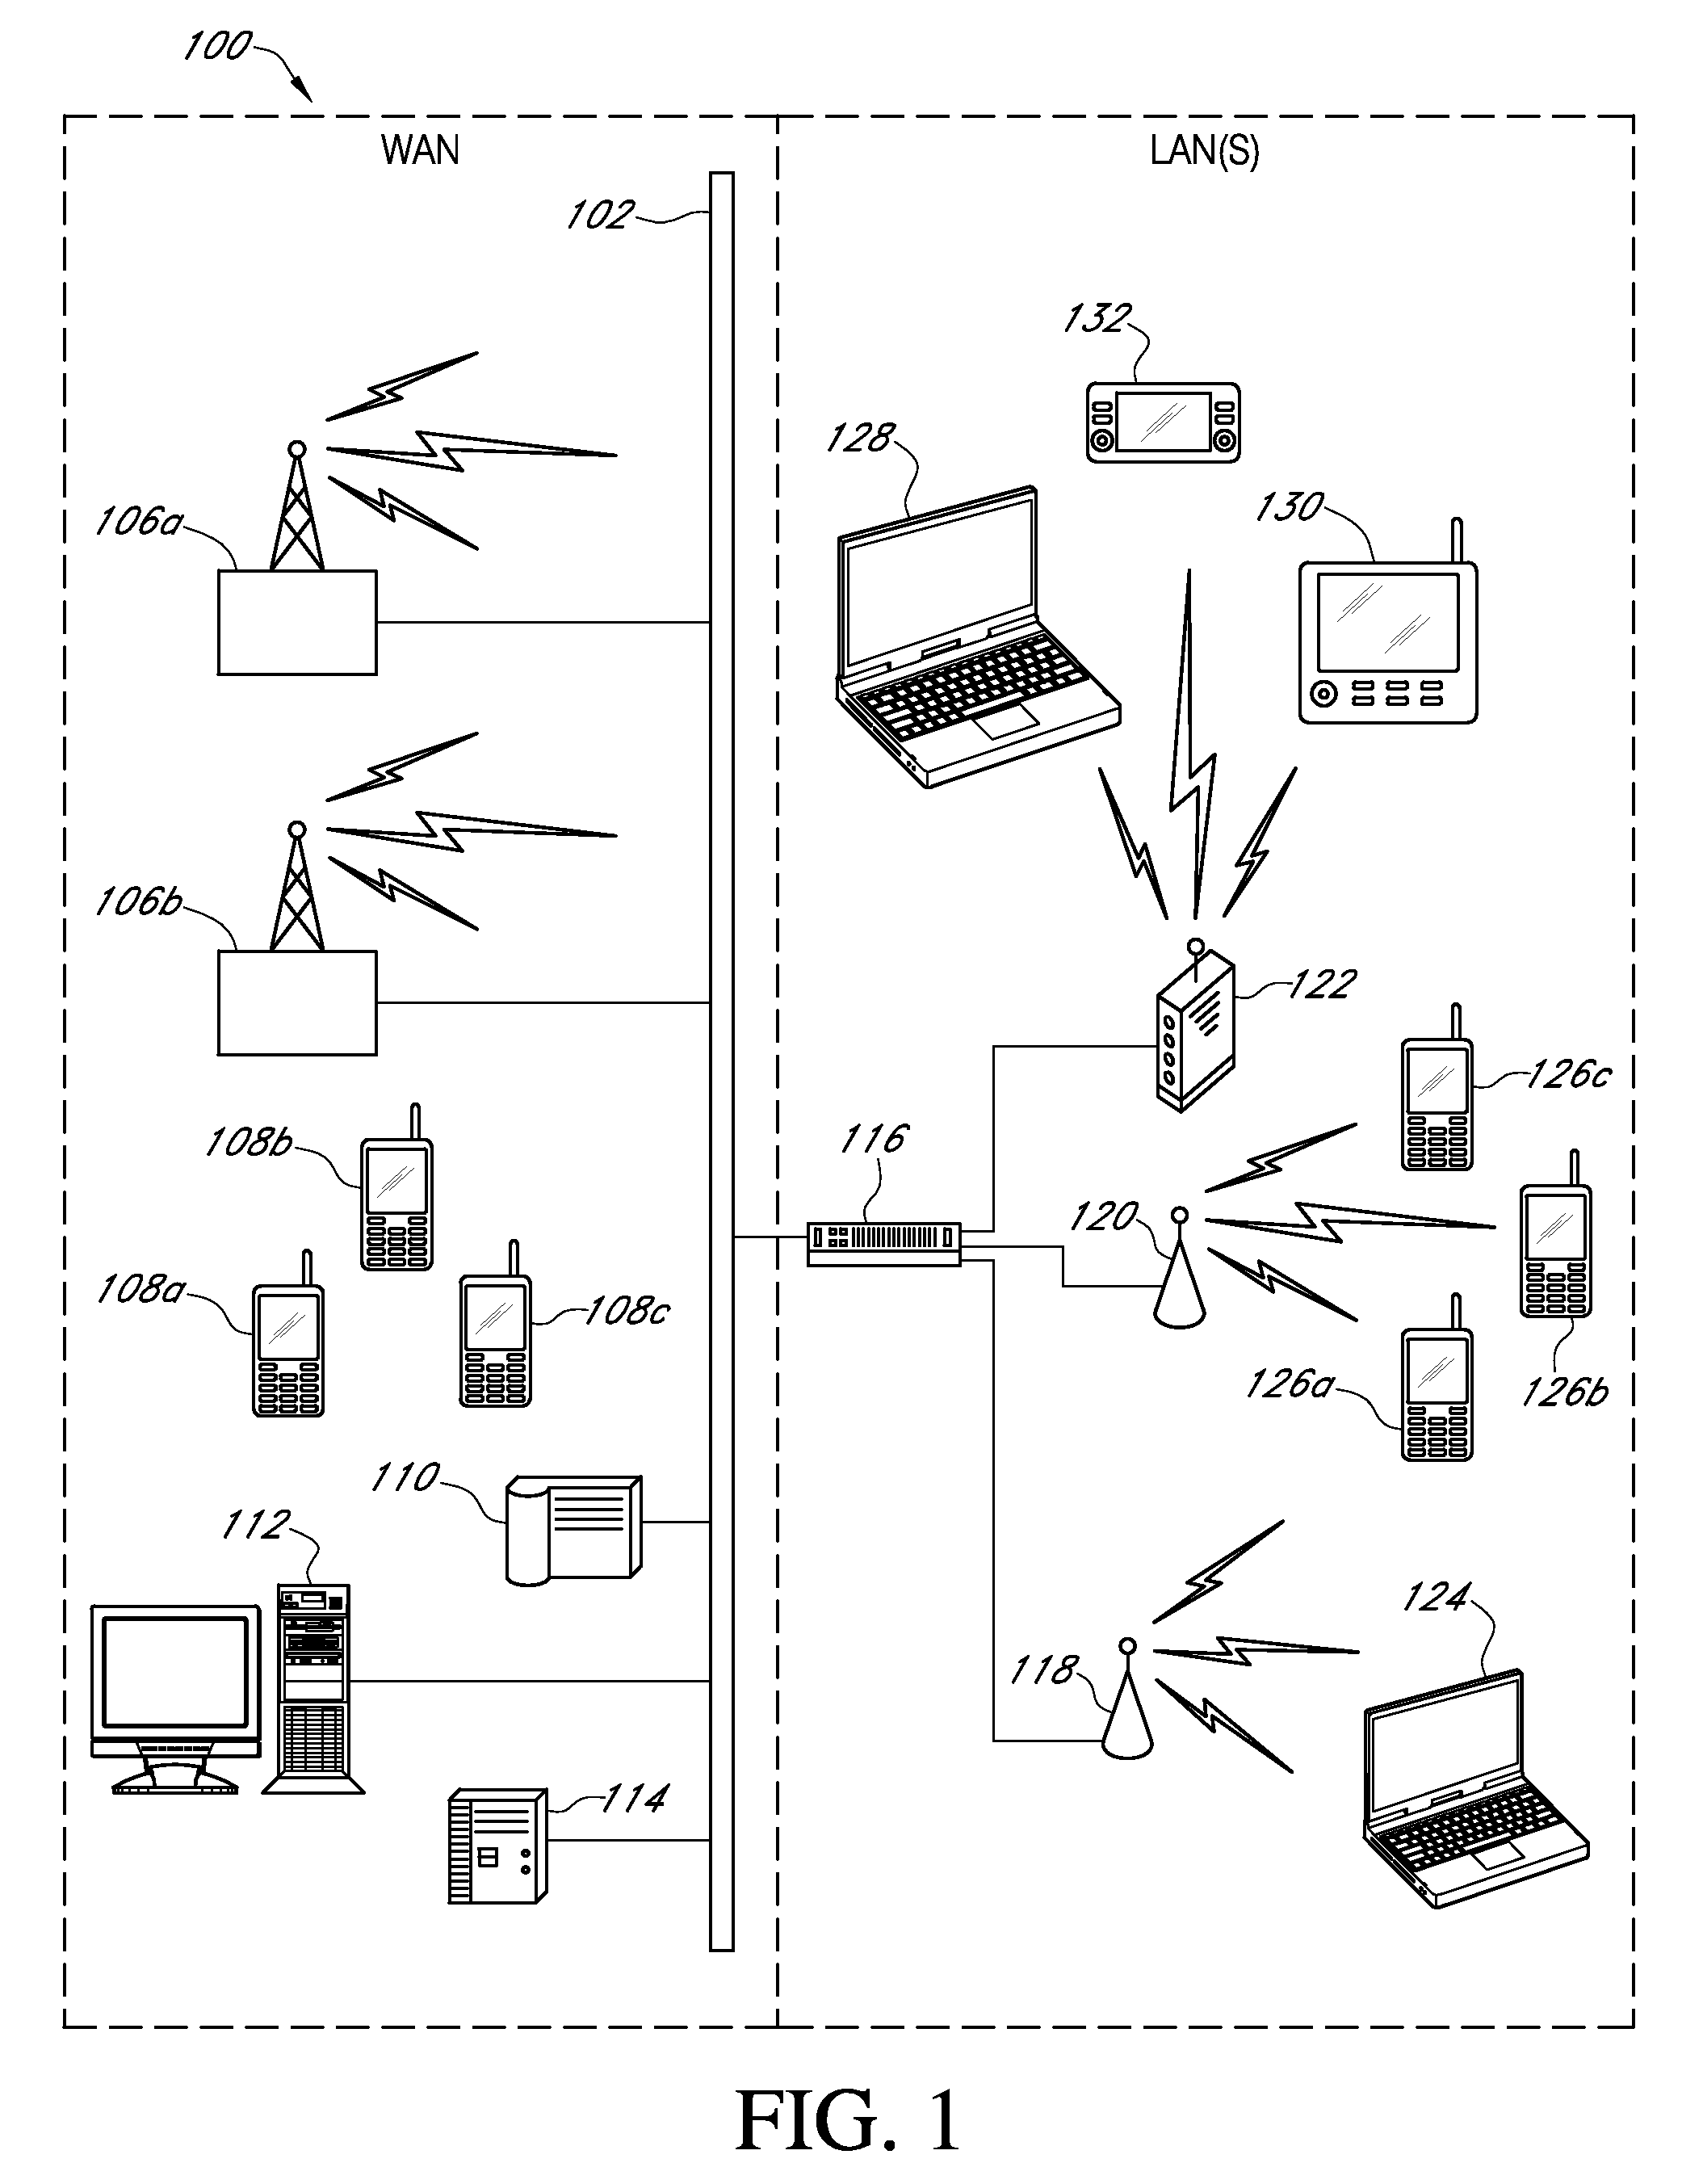 Systems and methods for enhanced data delivery based on real time analysis of network communications quality and traffic